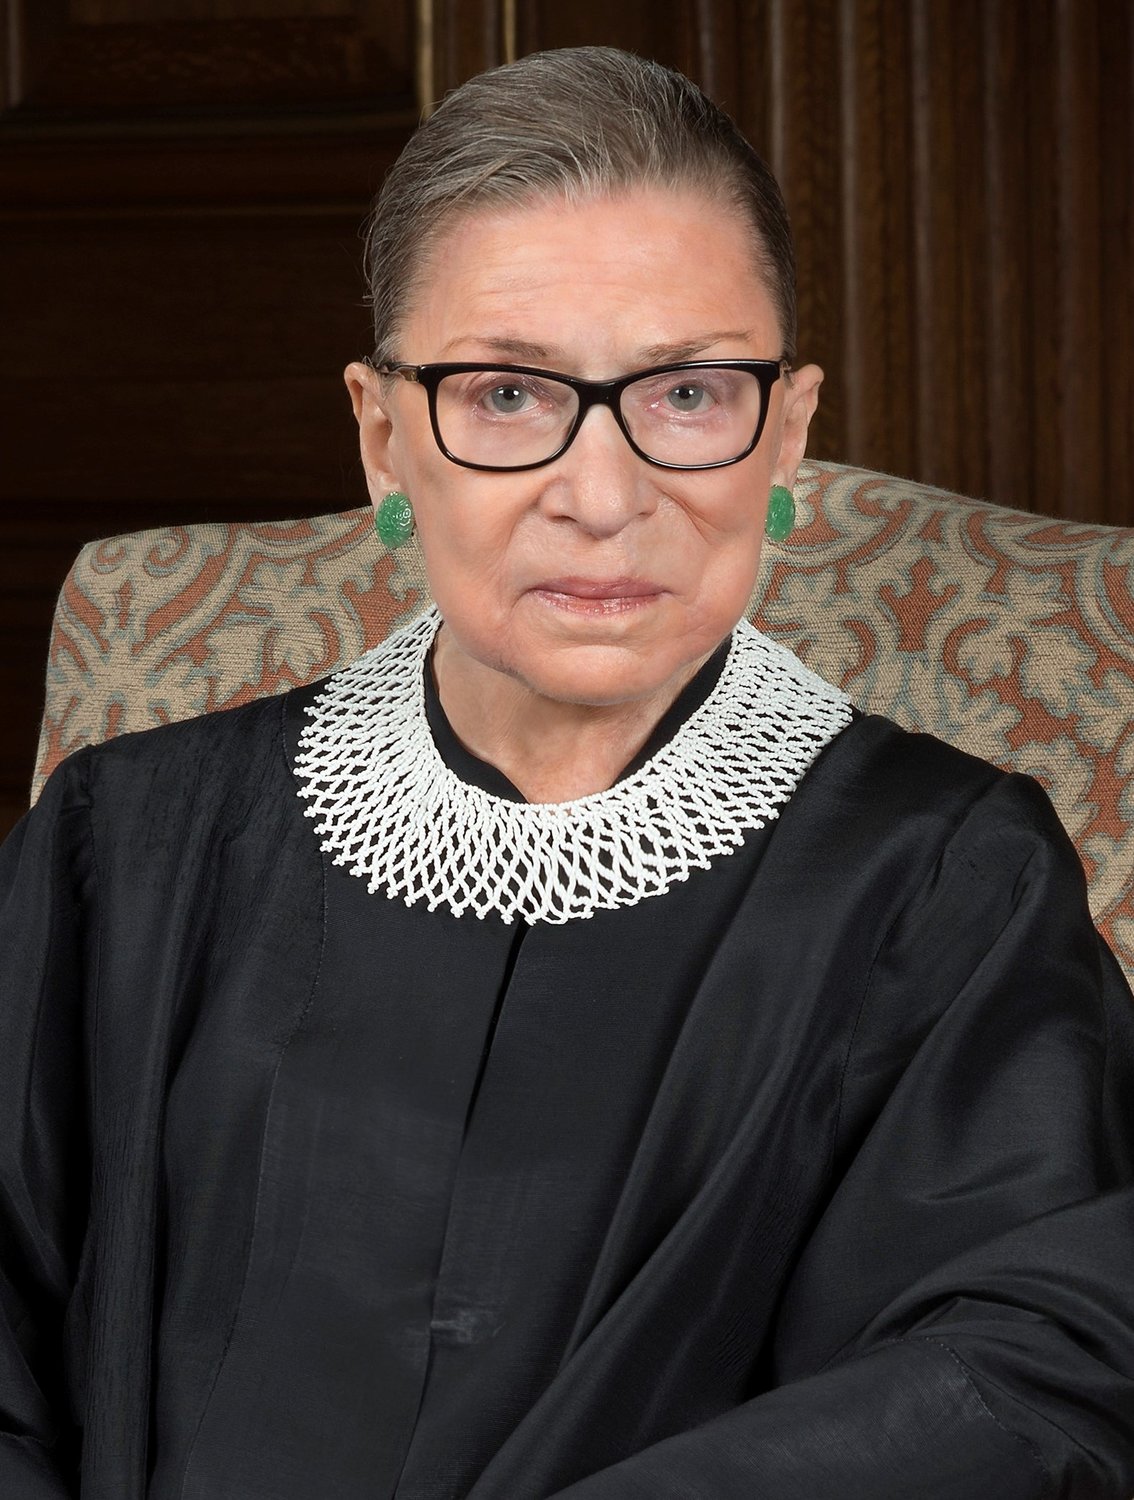 Remembering Ruth Bader Ginsburg Herald Community Newspapers www